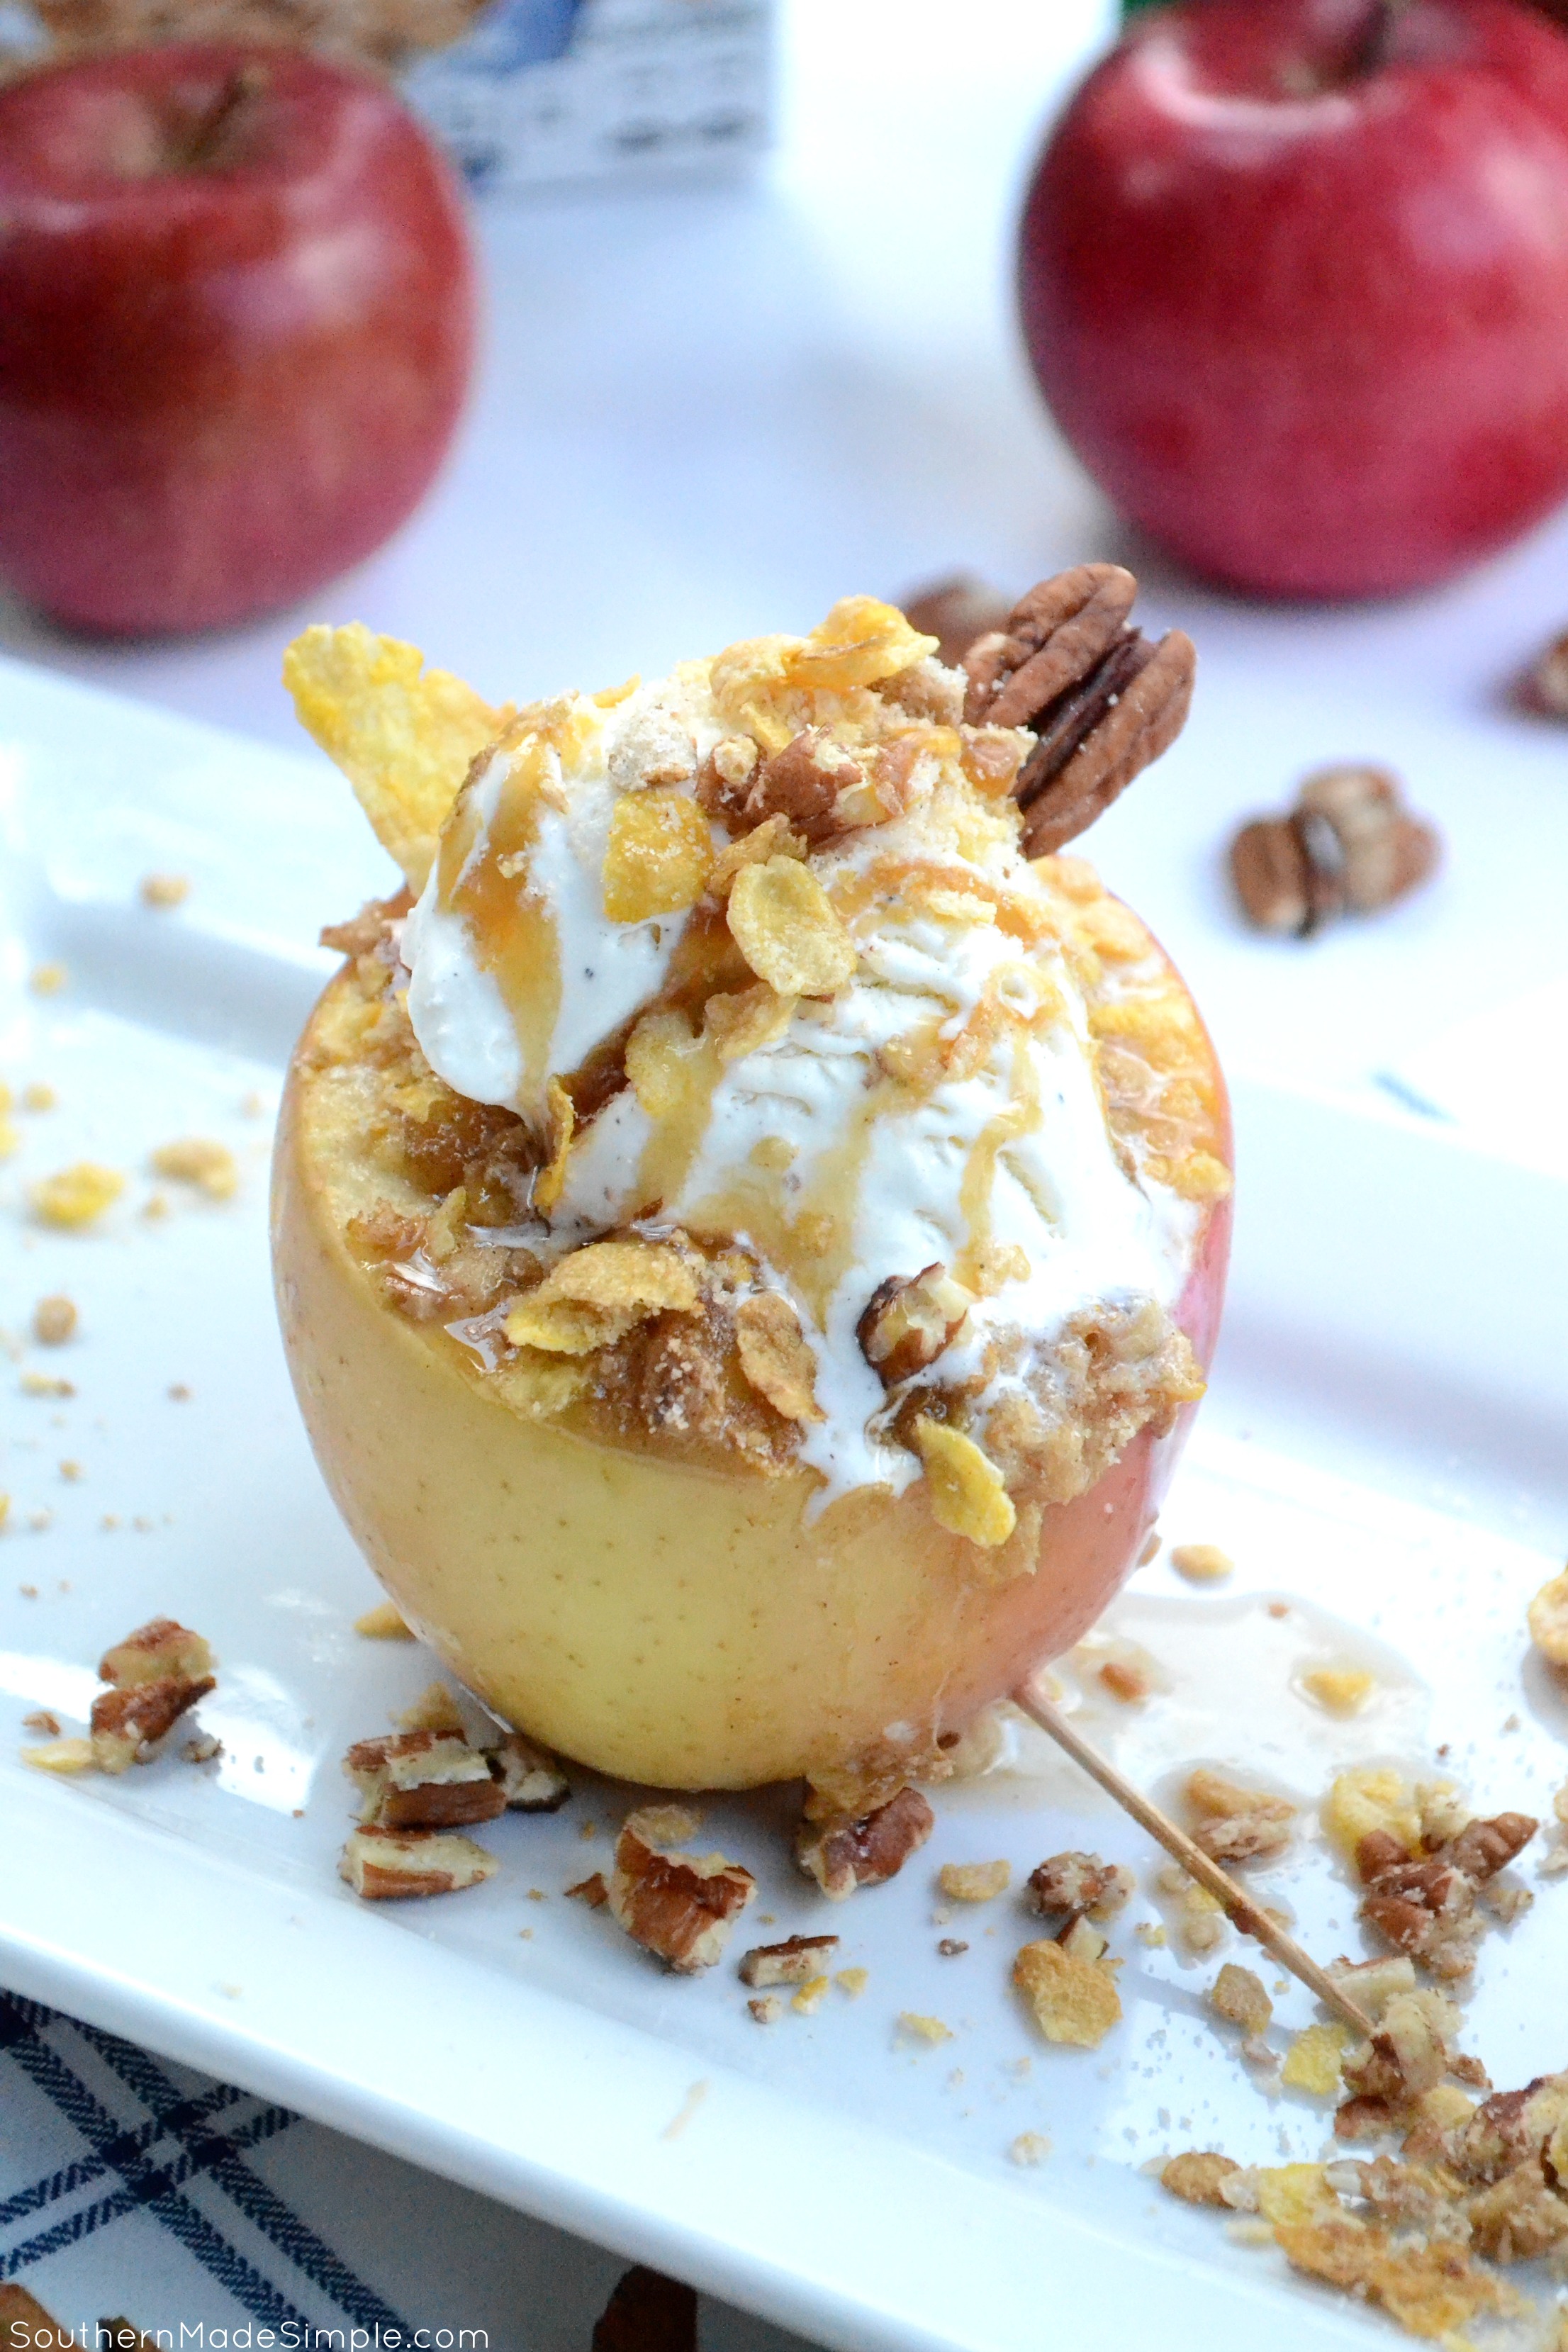 Fall is in full swing, and these Baked Honey Pecan Stuffed Apples are the perfect way to celebrate! Make with Honey Bunches of Oats to give them a crispy crunch topping, you'll want to go back for seconds! #ad